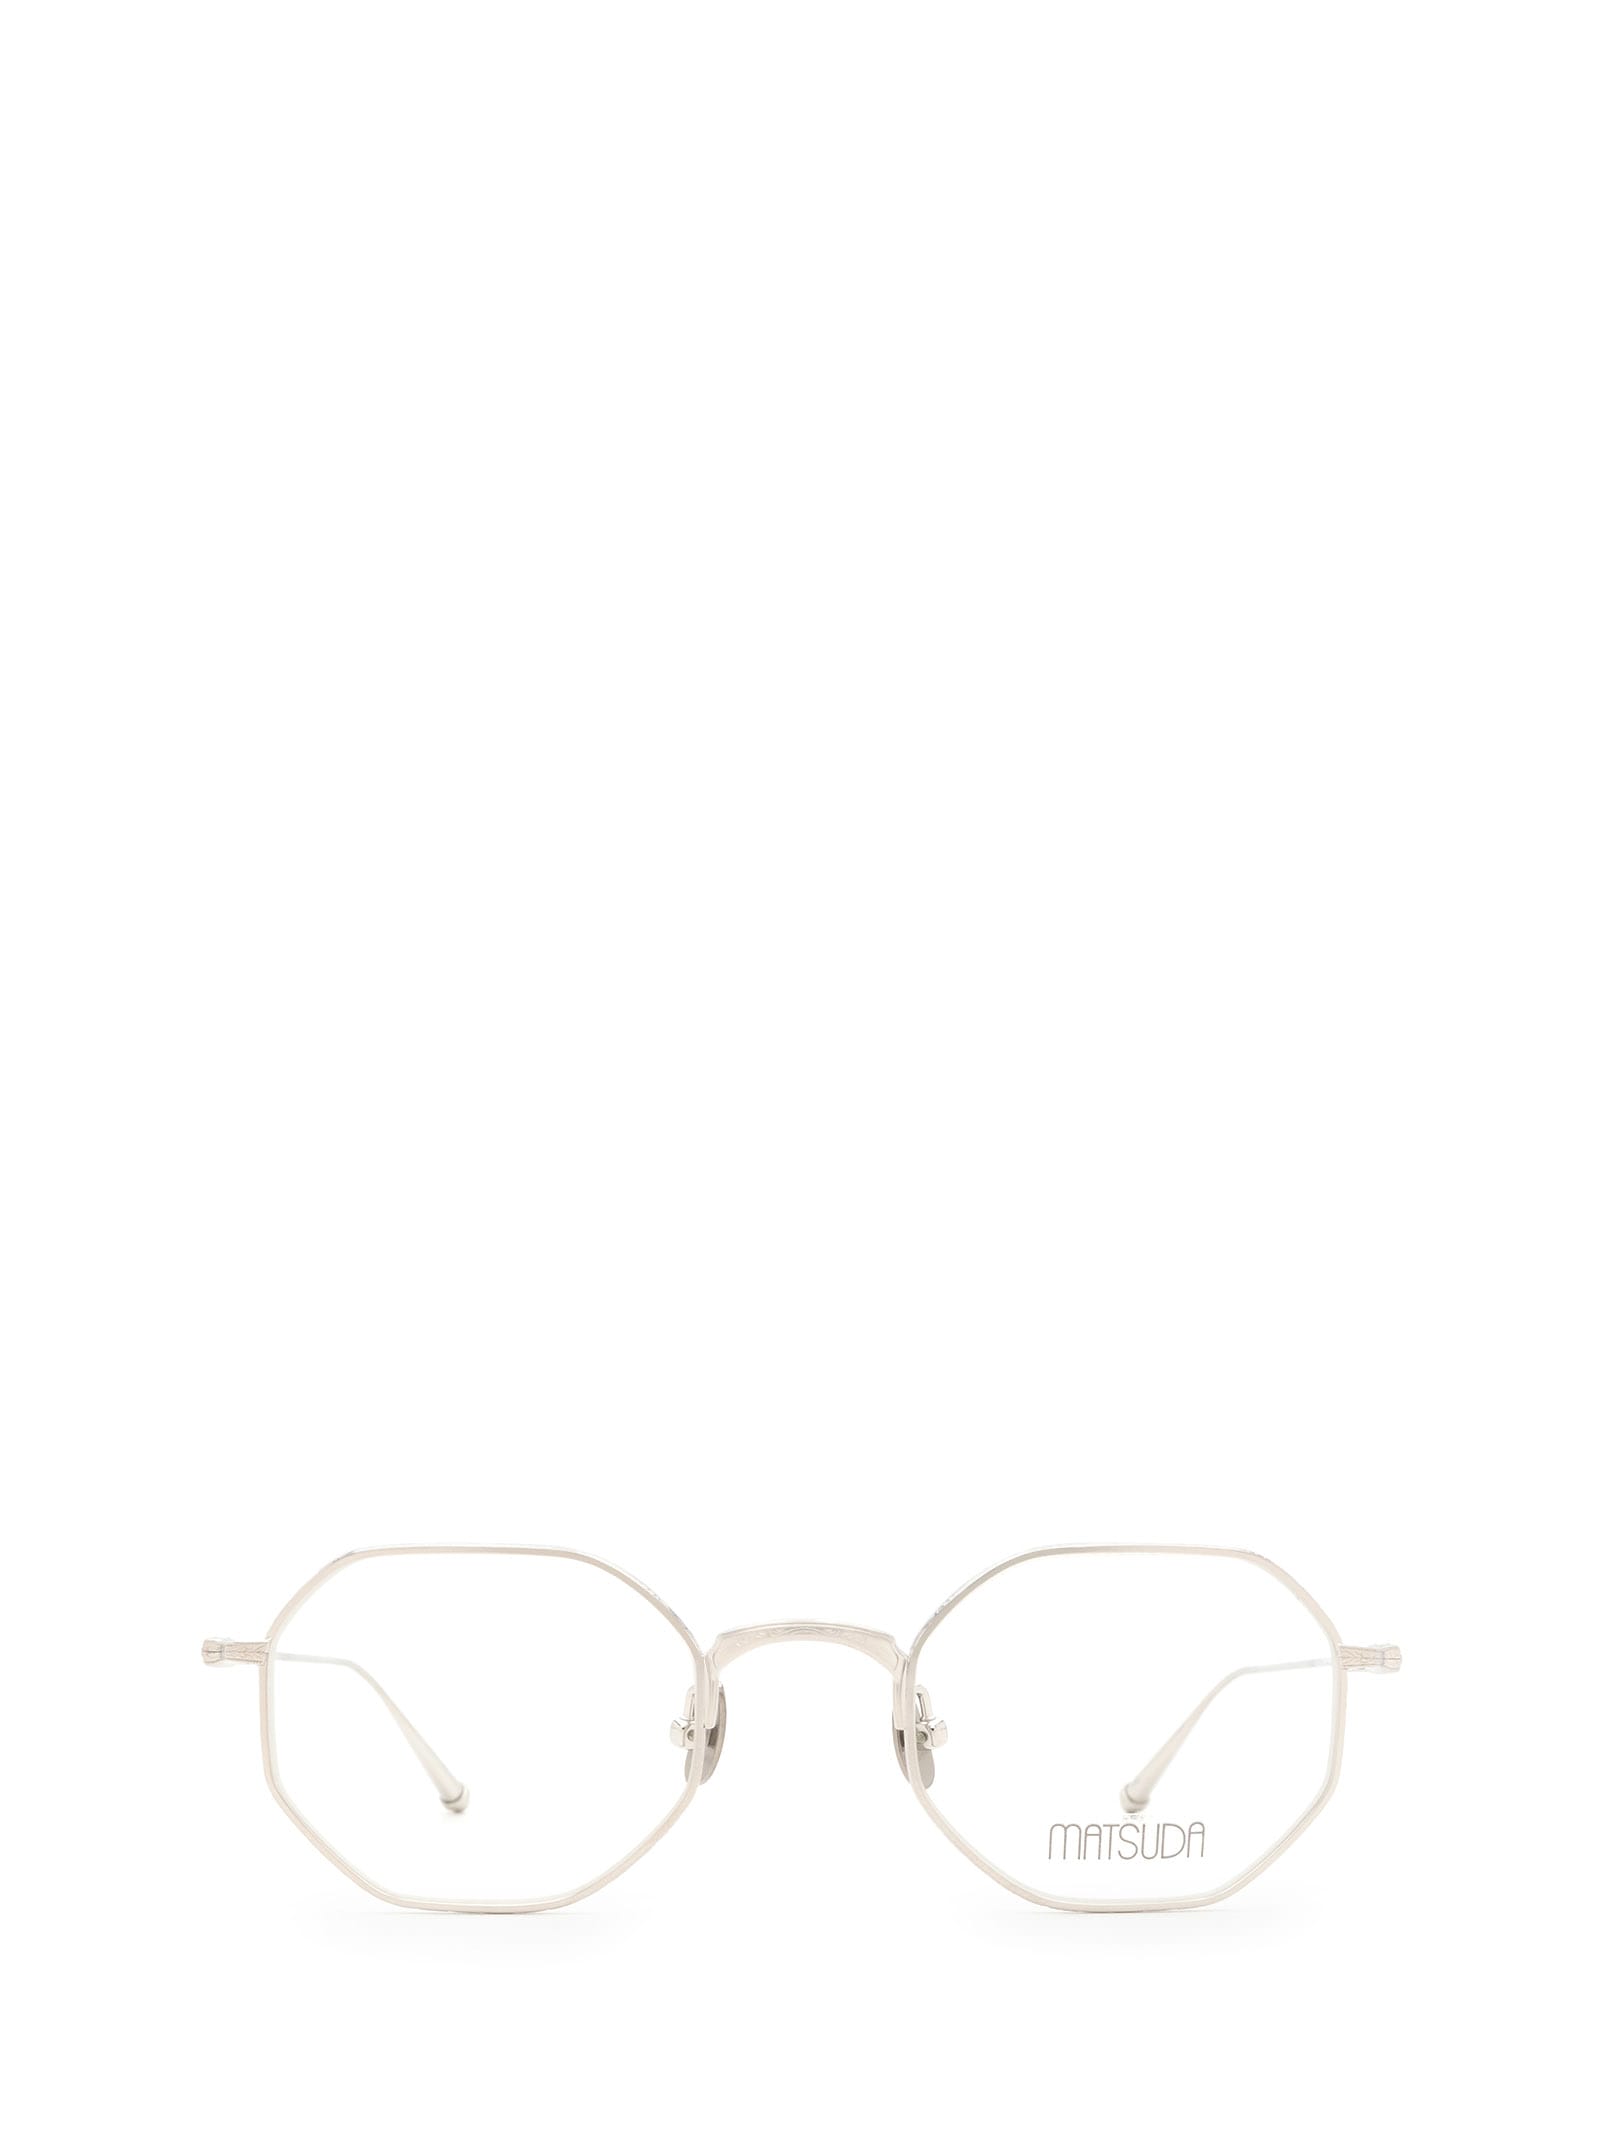 MATSUDA M3086 OPT BRUSHED SILVER GLASSES,M3086 OPT BS